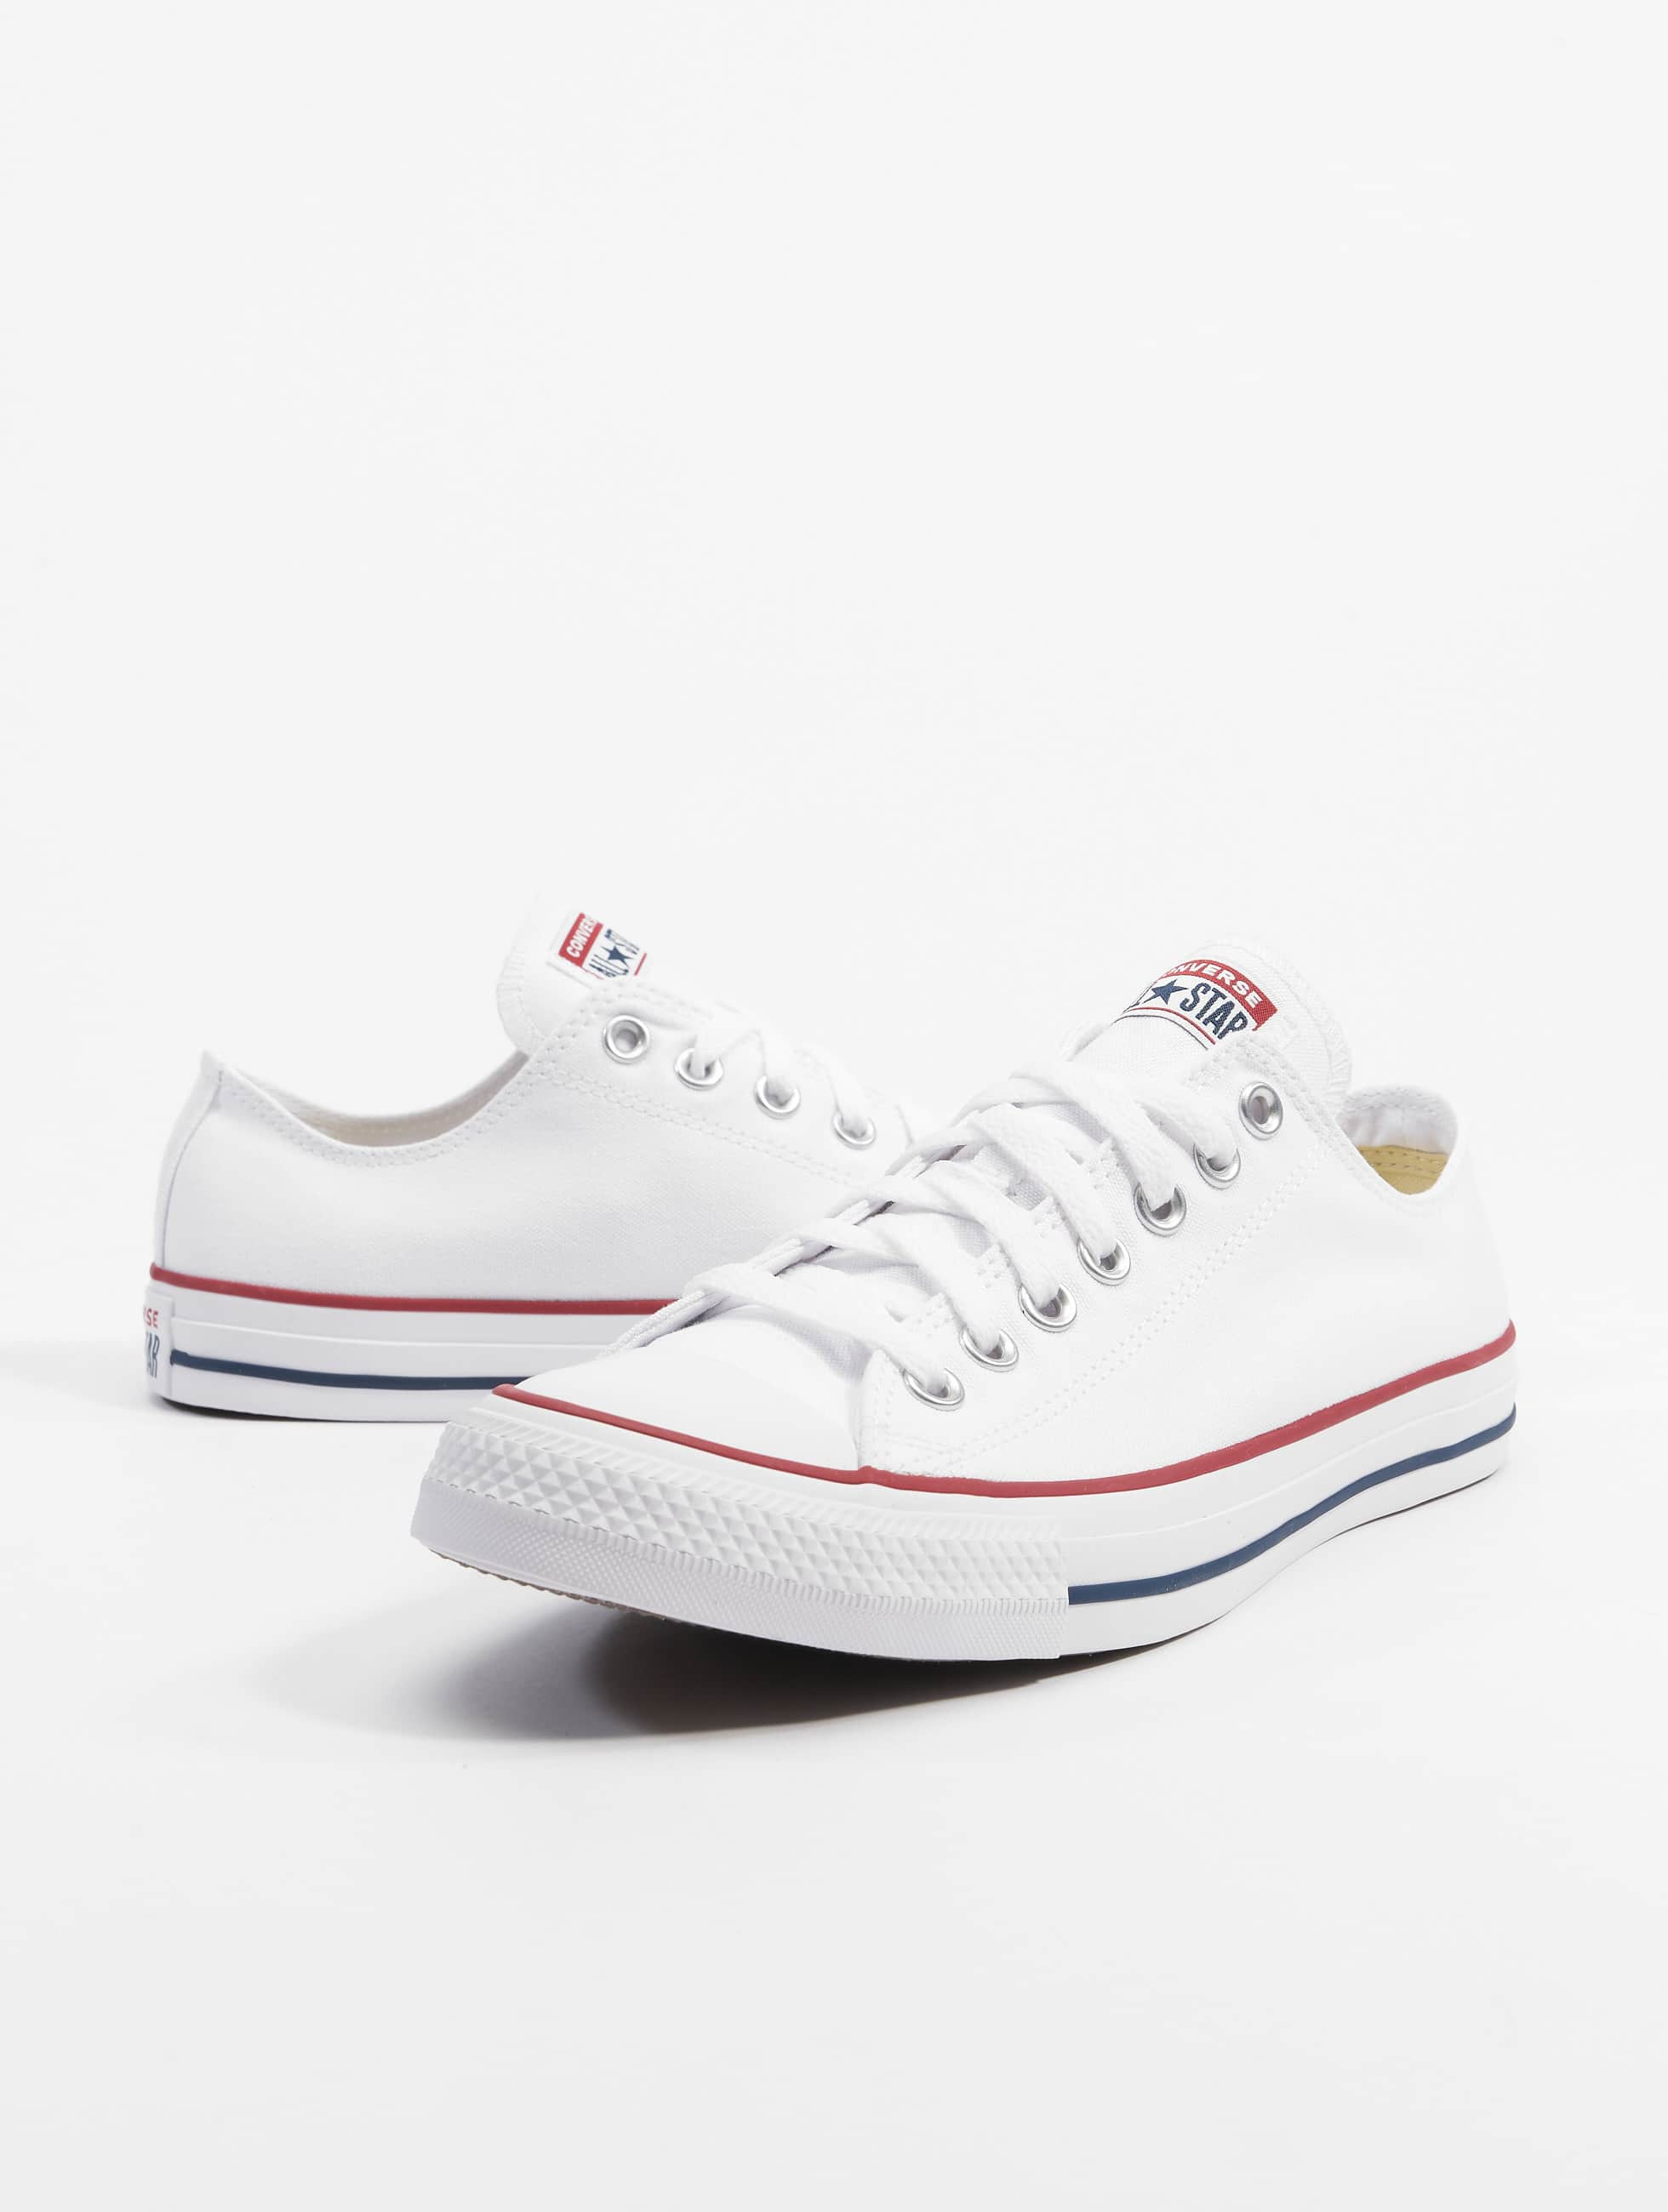 Converse Shoe / Sneakers All Star Ox Canvas in white 122836